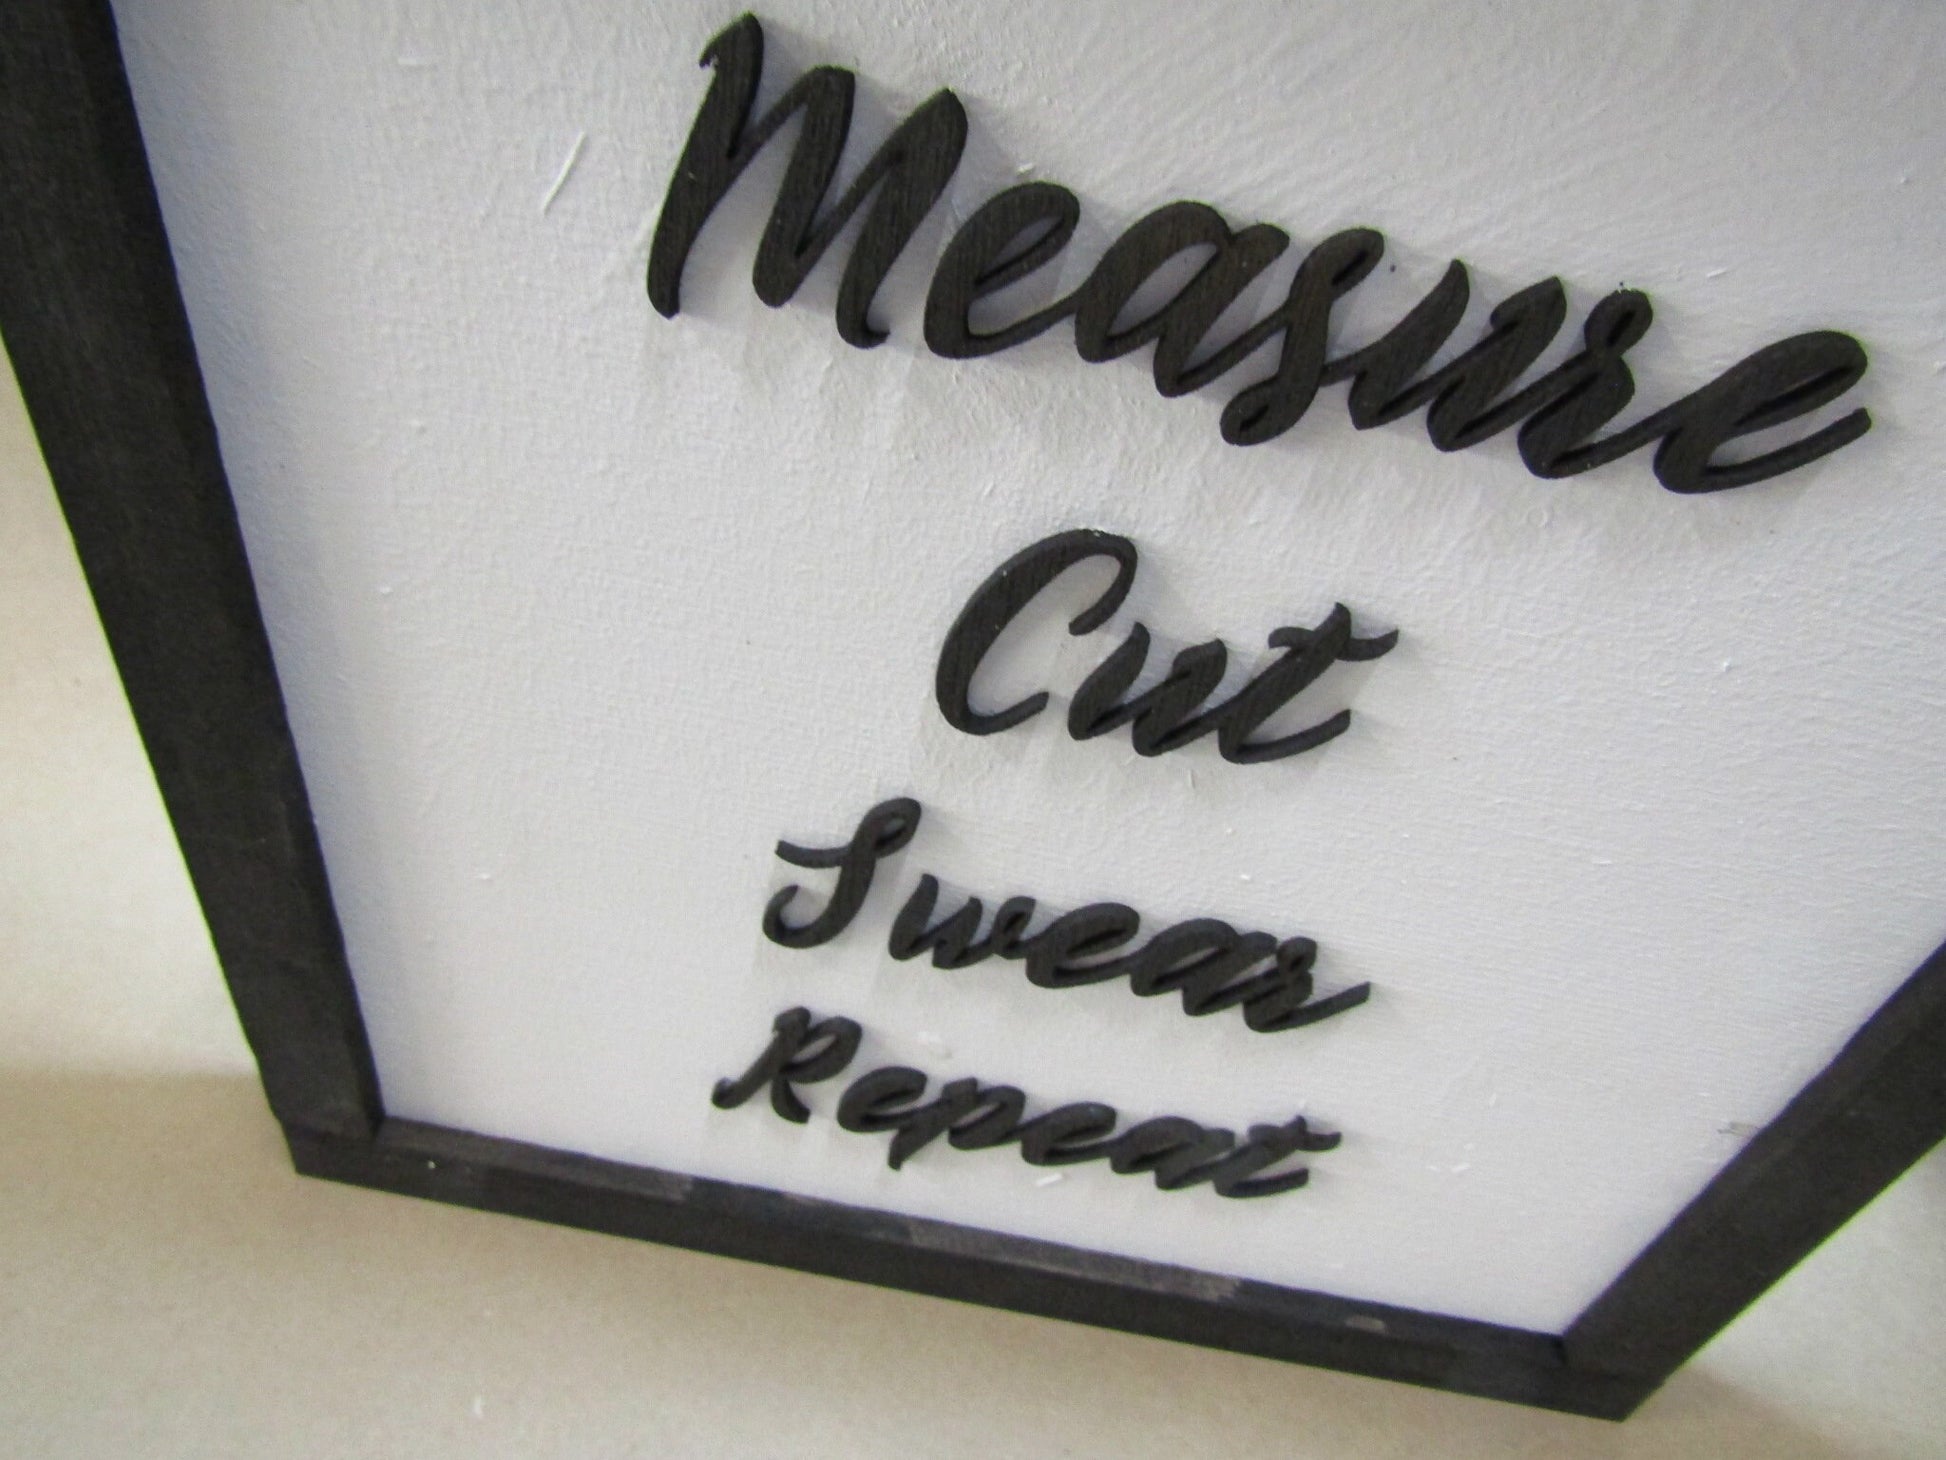 Wooden Crafter Sign Funny Measure Cut Swear Repeat Sew Seamstress Craft Room Decor Garage Carpenter Do It Yourself 3D Raised Text Handmade